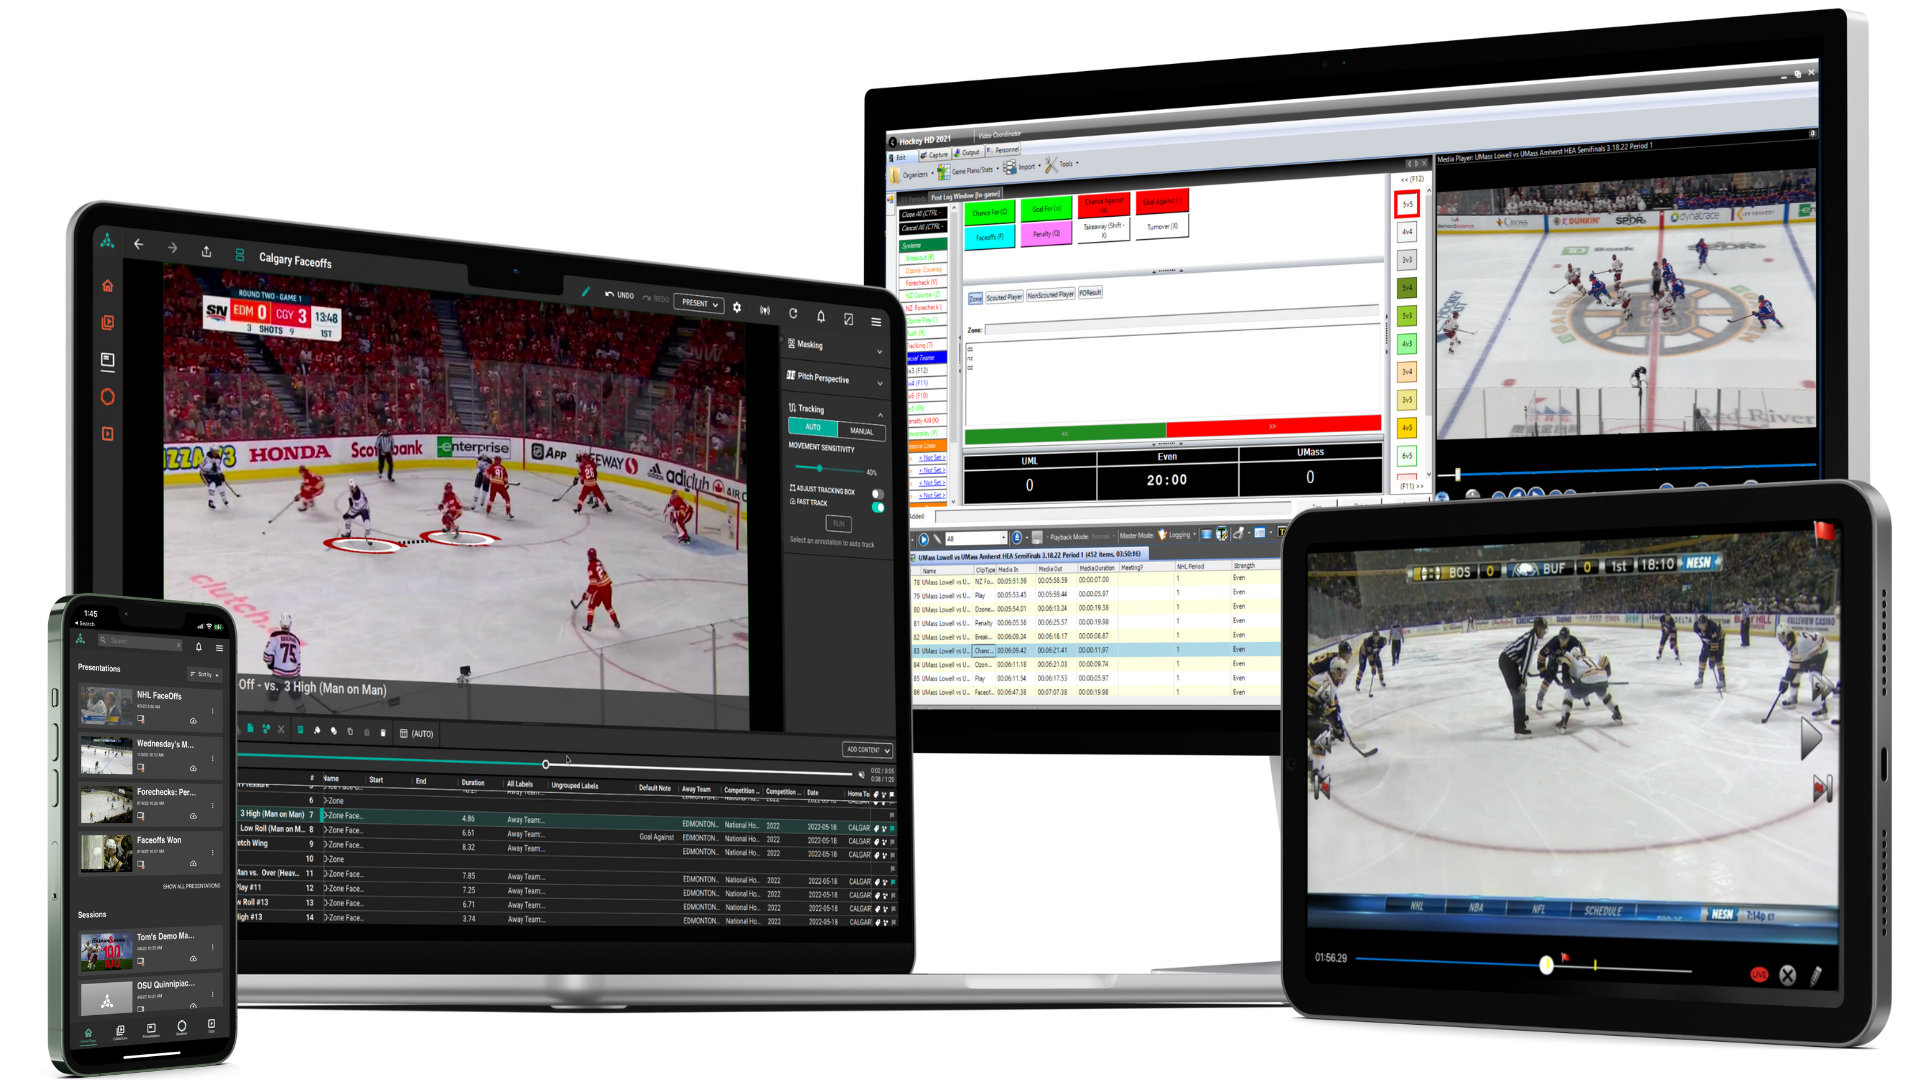 Catapult Pro Video: cutting-edge ice hockey video analysis Software. Coaching tools optimized to help teams win with video analytics: Thunder Hockey + iBench Mock collab